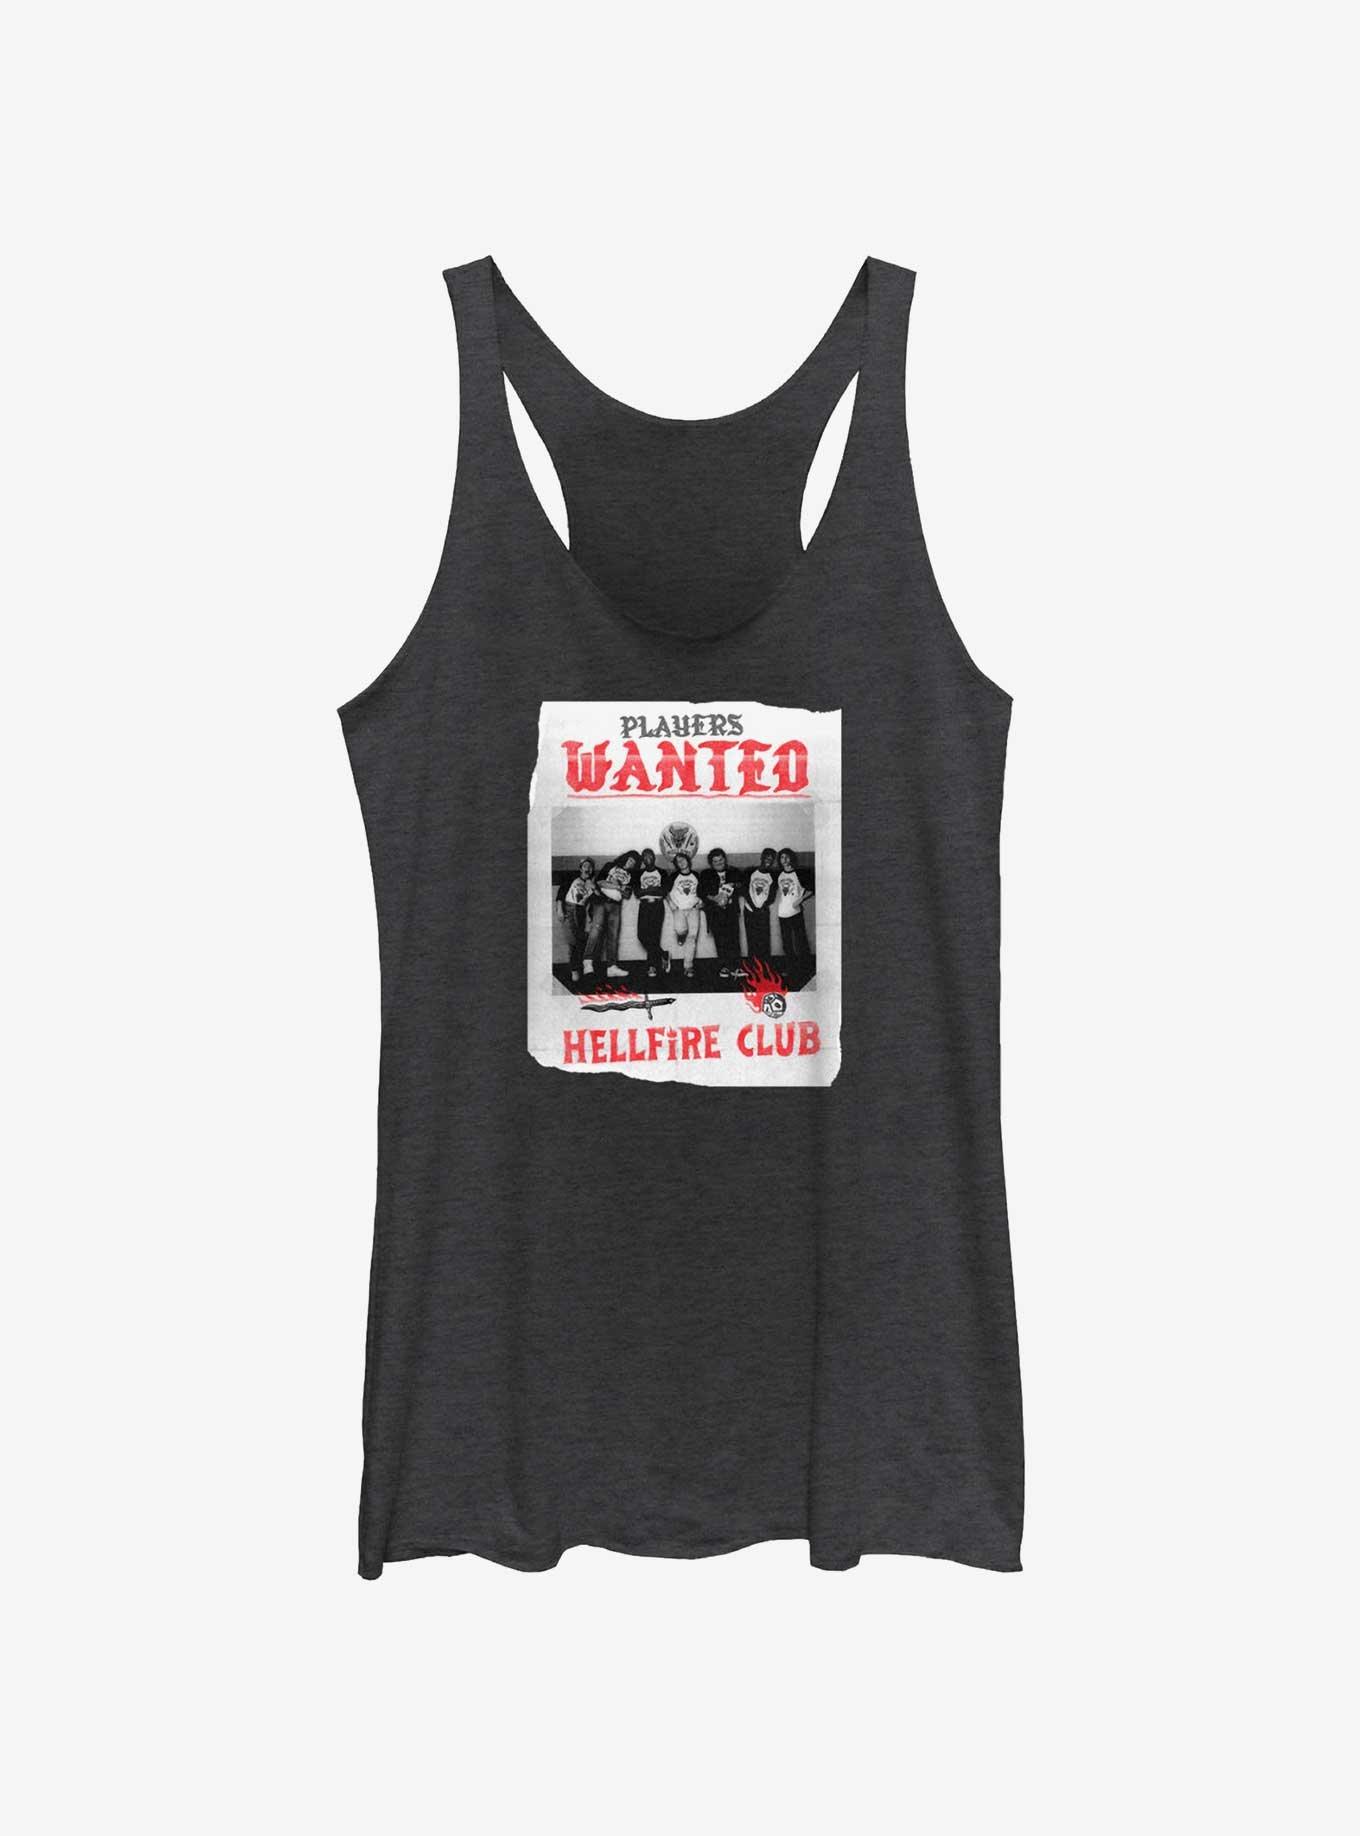 Stranger Things Hellfire Club Players Wanted Poster Girls Tank, BLK HTR, hi-res